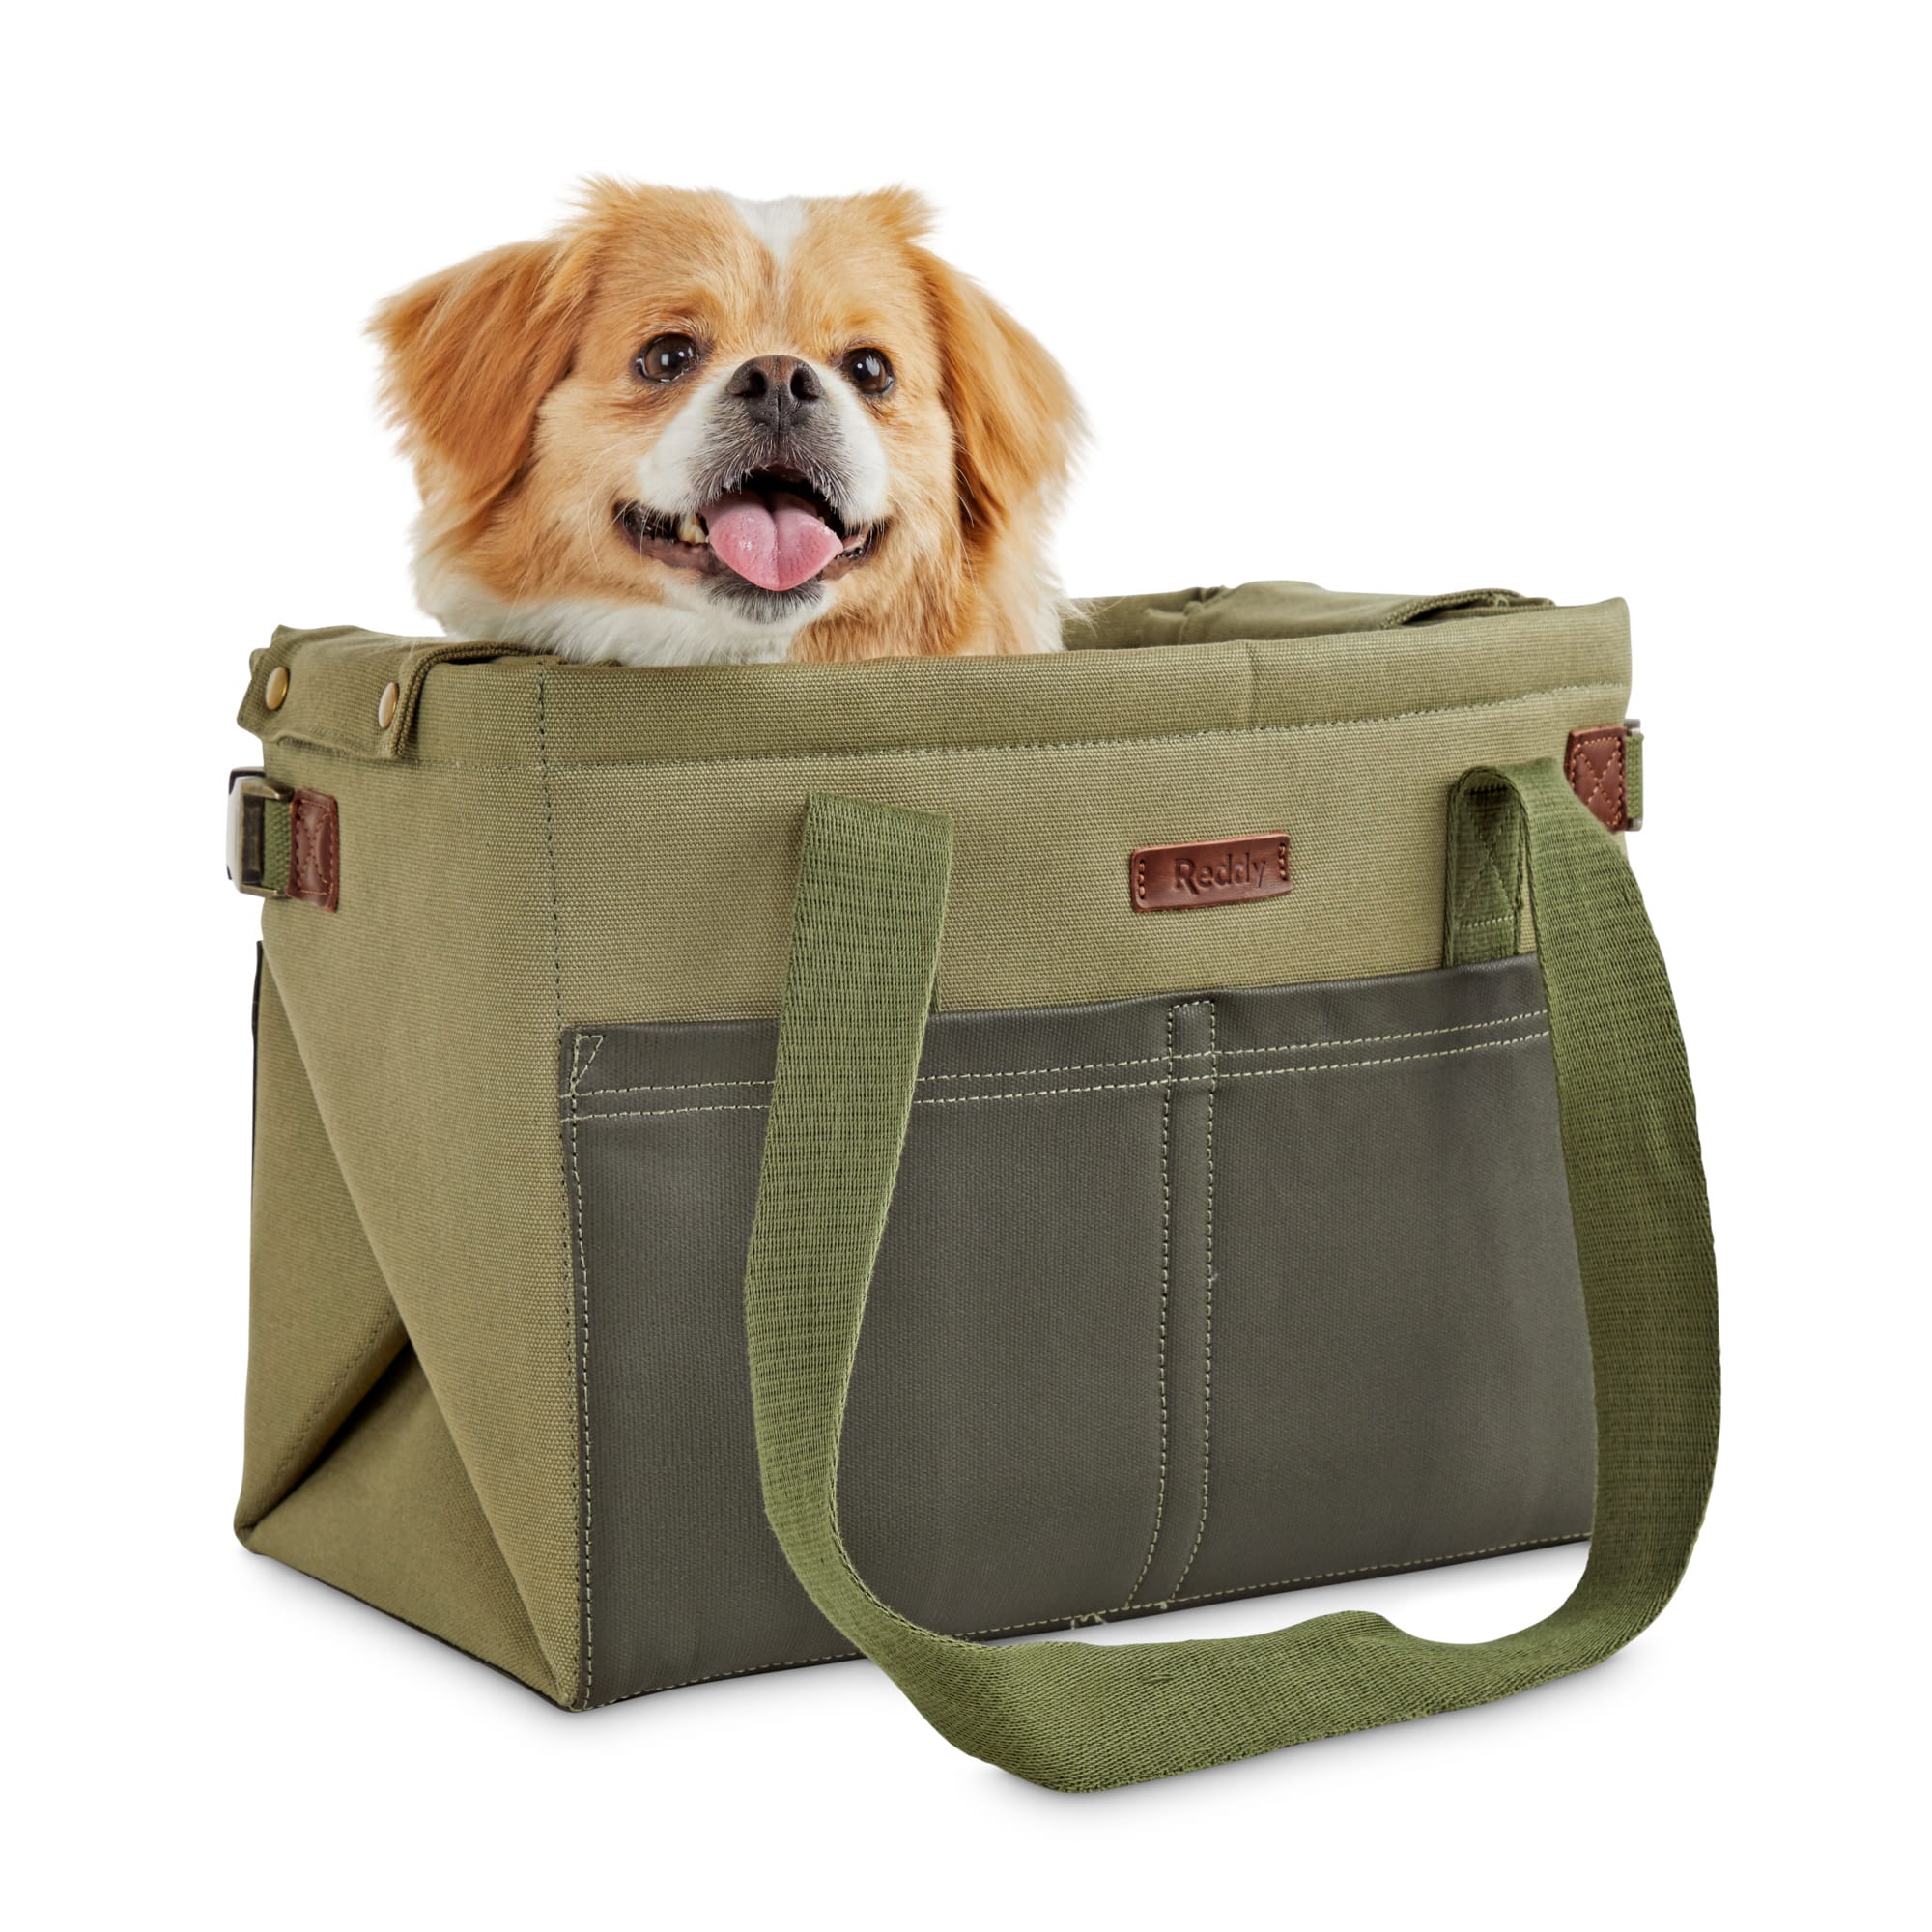 dog in carrier